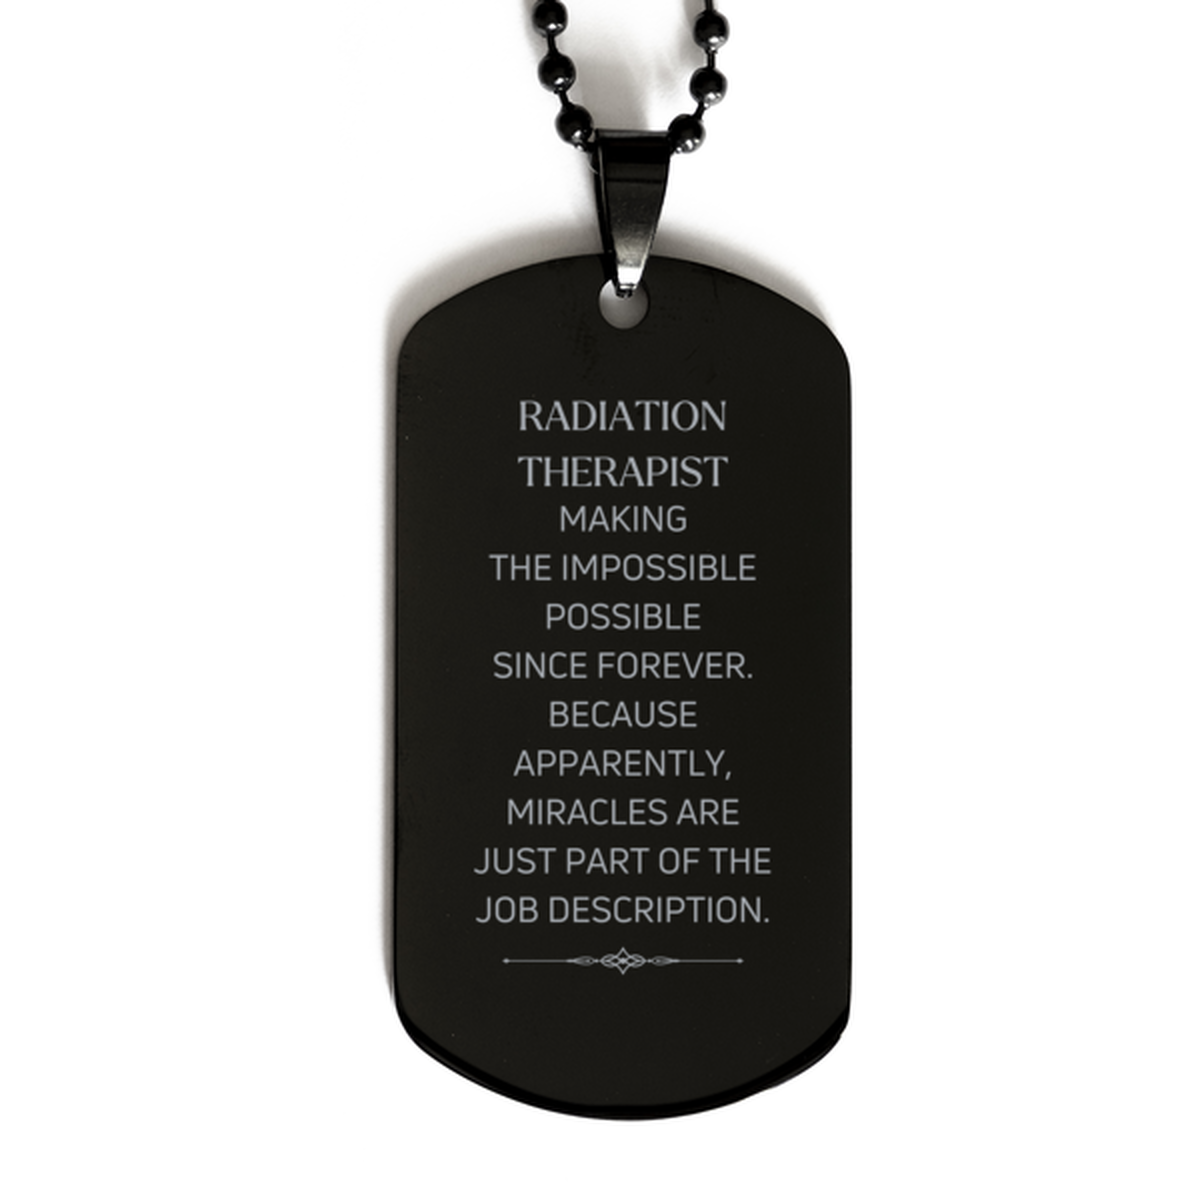 Funny Radiation Therapist Gifts, Miracles are just part of the job description, Inspirational Birthday Black Dog Tag For Radiation Therapist, Men, Women, Coworkers, Friends, Boss